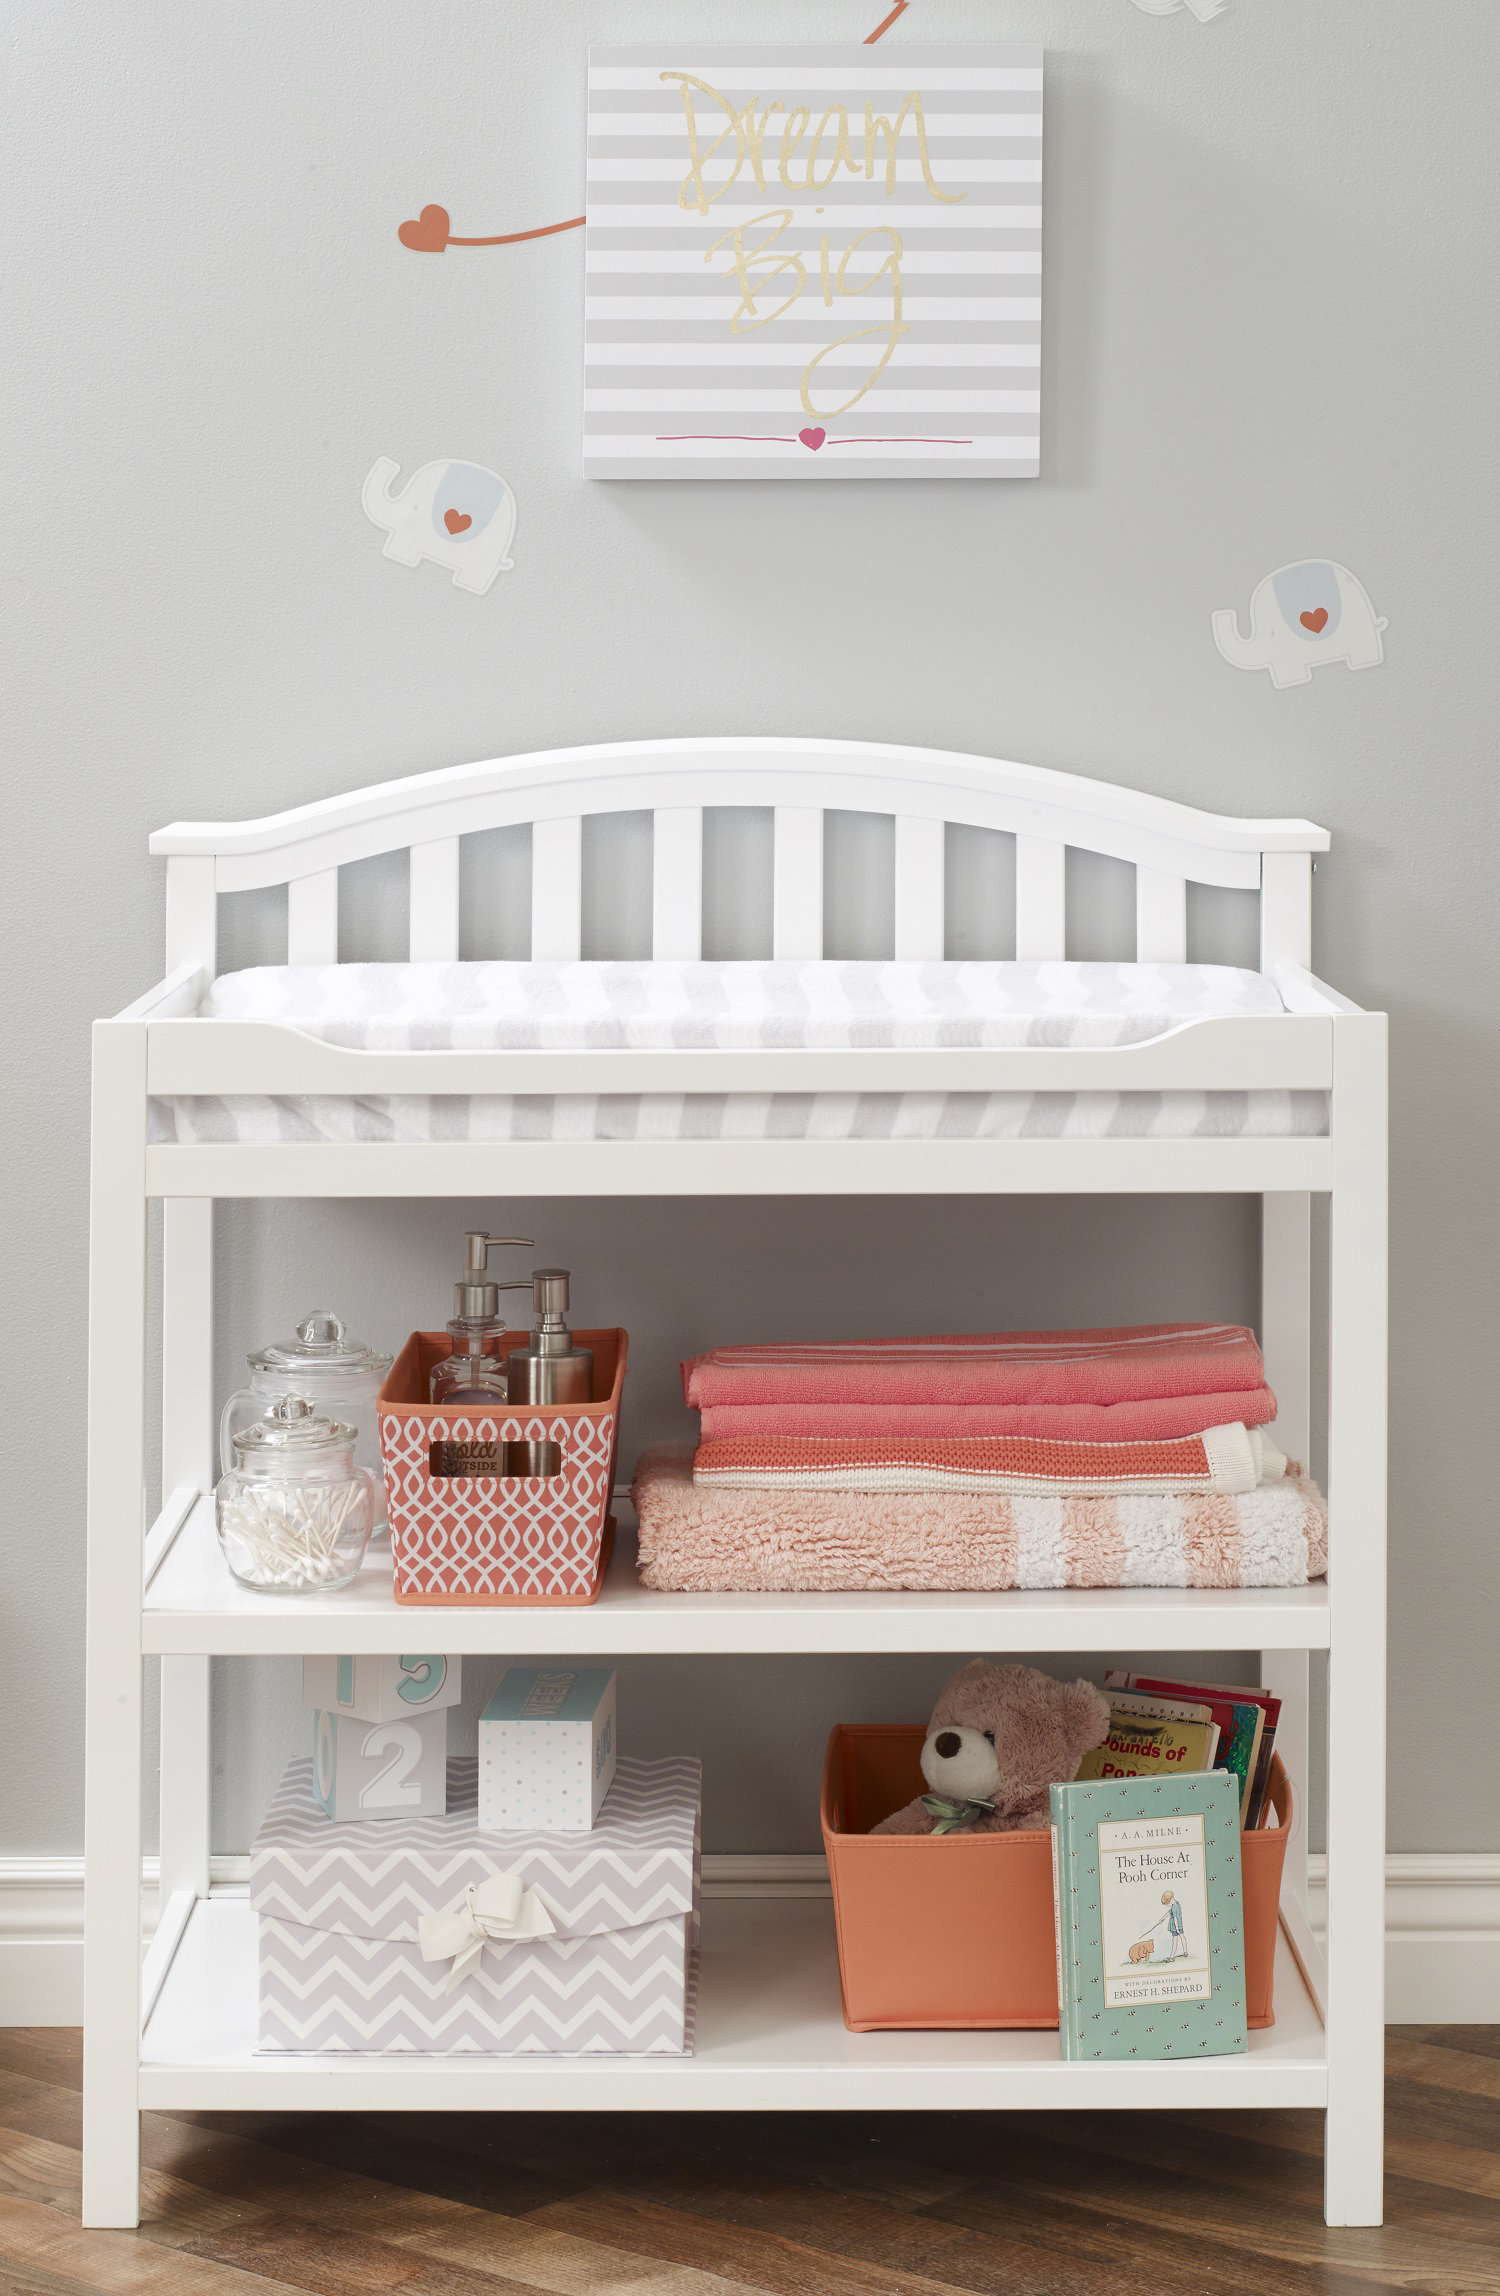 baby changing table cost